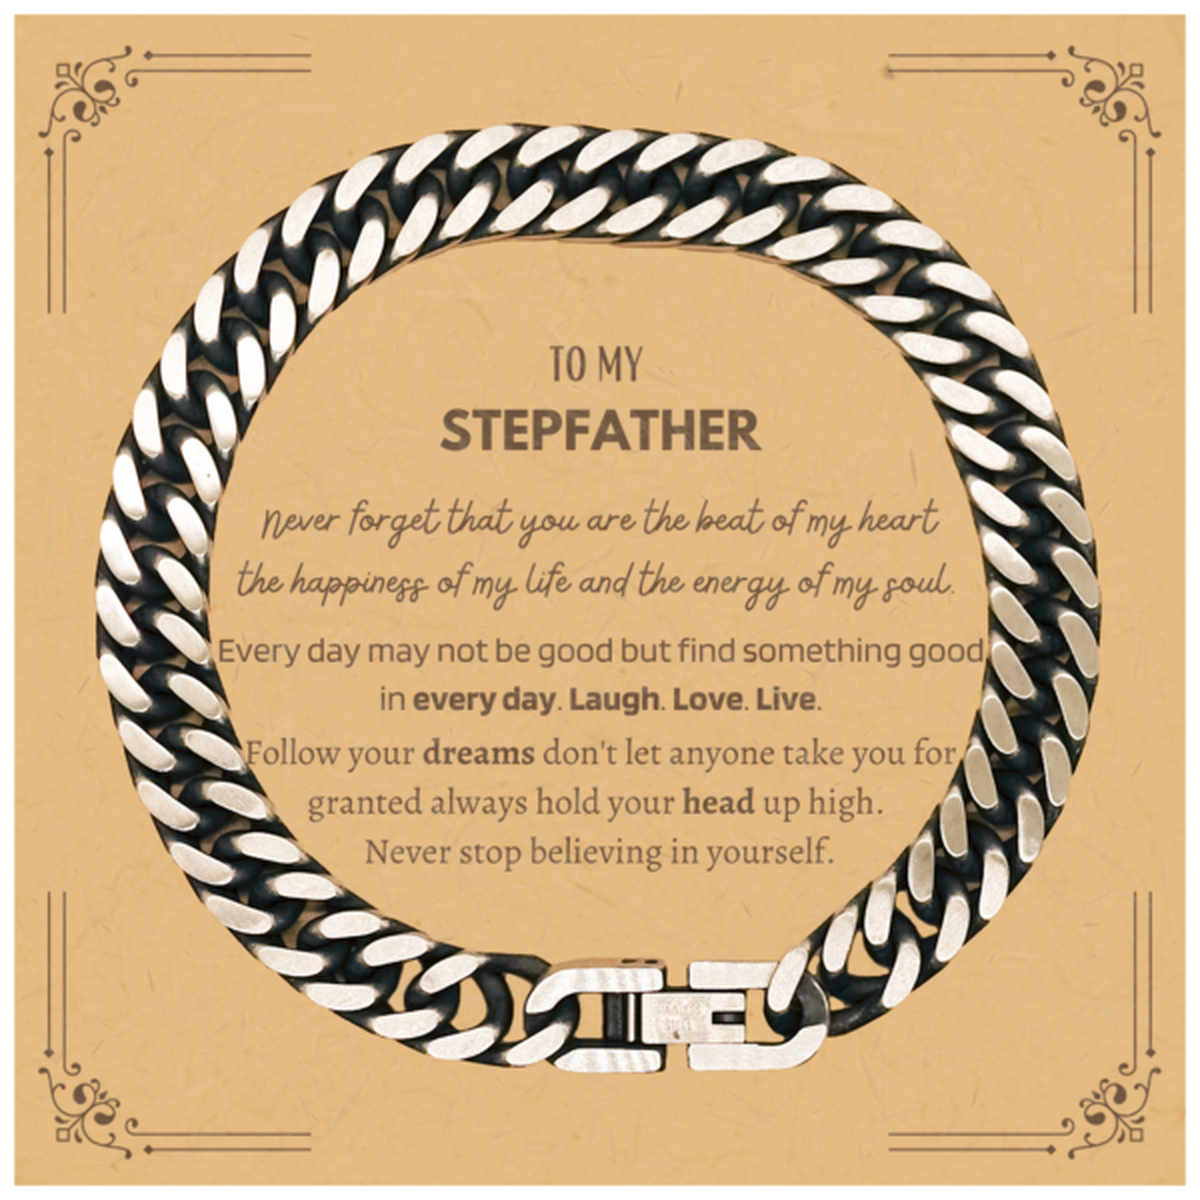 To My Stepfather Message Card Gifts, Christmas Stepfather Cuban Link Chain Bracelet Present, Birthday Unique Motivational For Stepfather, To My Stepfather Never forget that you are the beat of my heart the happiness of my life and the energy of my soul